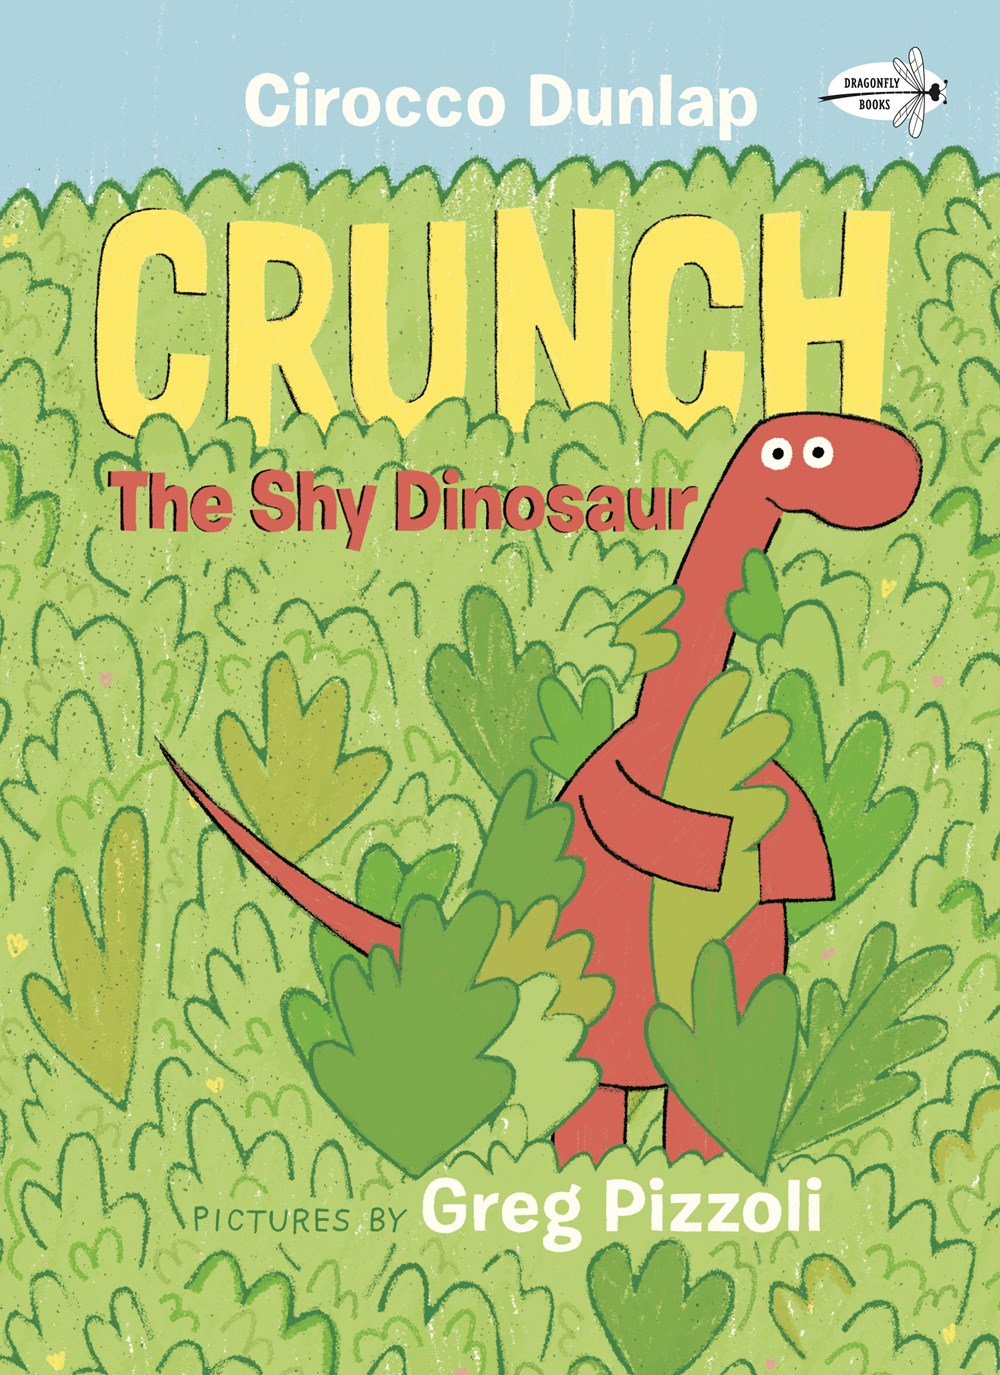 Crunch the Shy Dinosaur by Cirocco Dunlap, Illustrated by Greg Pizzoli